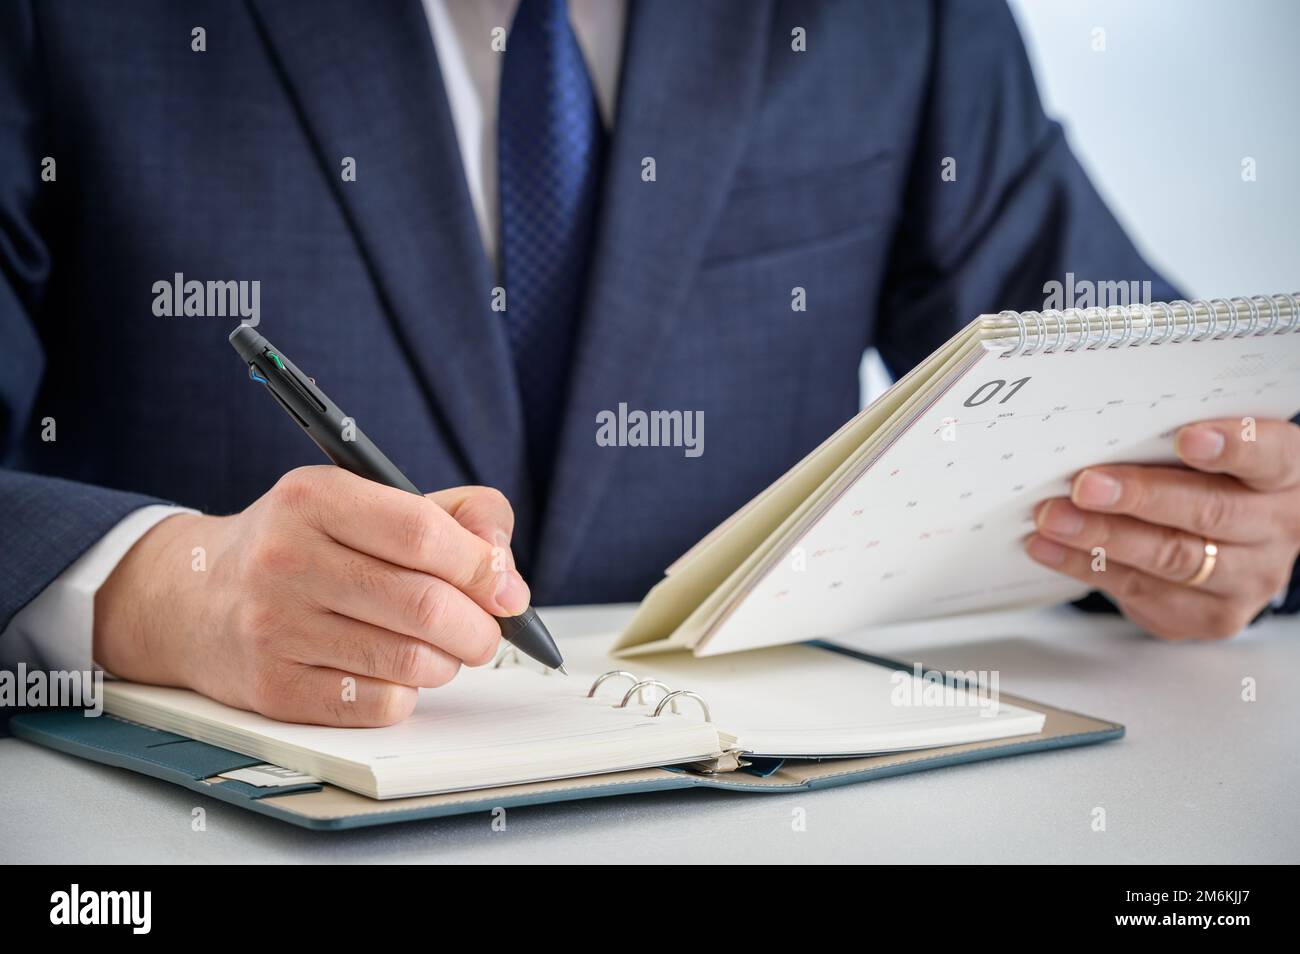 Hands of a businessman writing a schedule or recording ideas in a diary Stock Photo